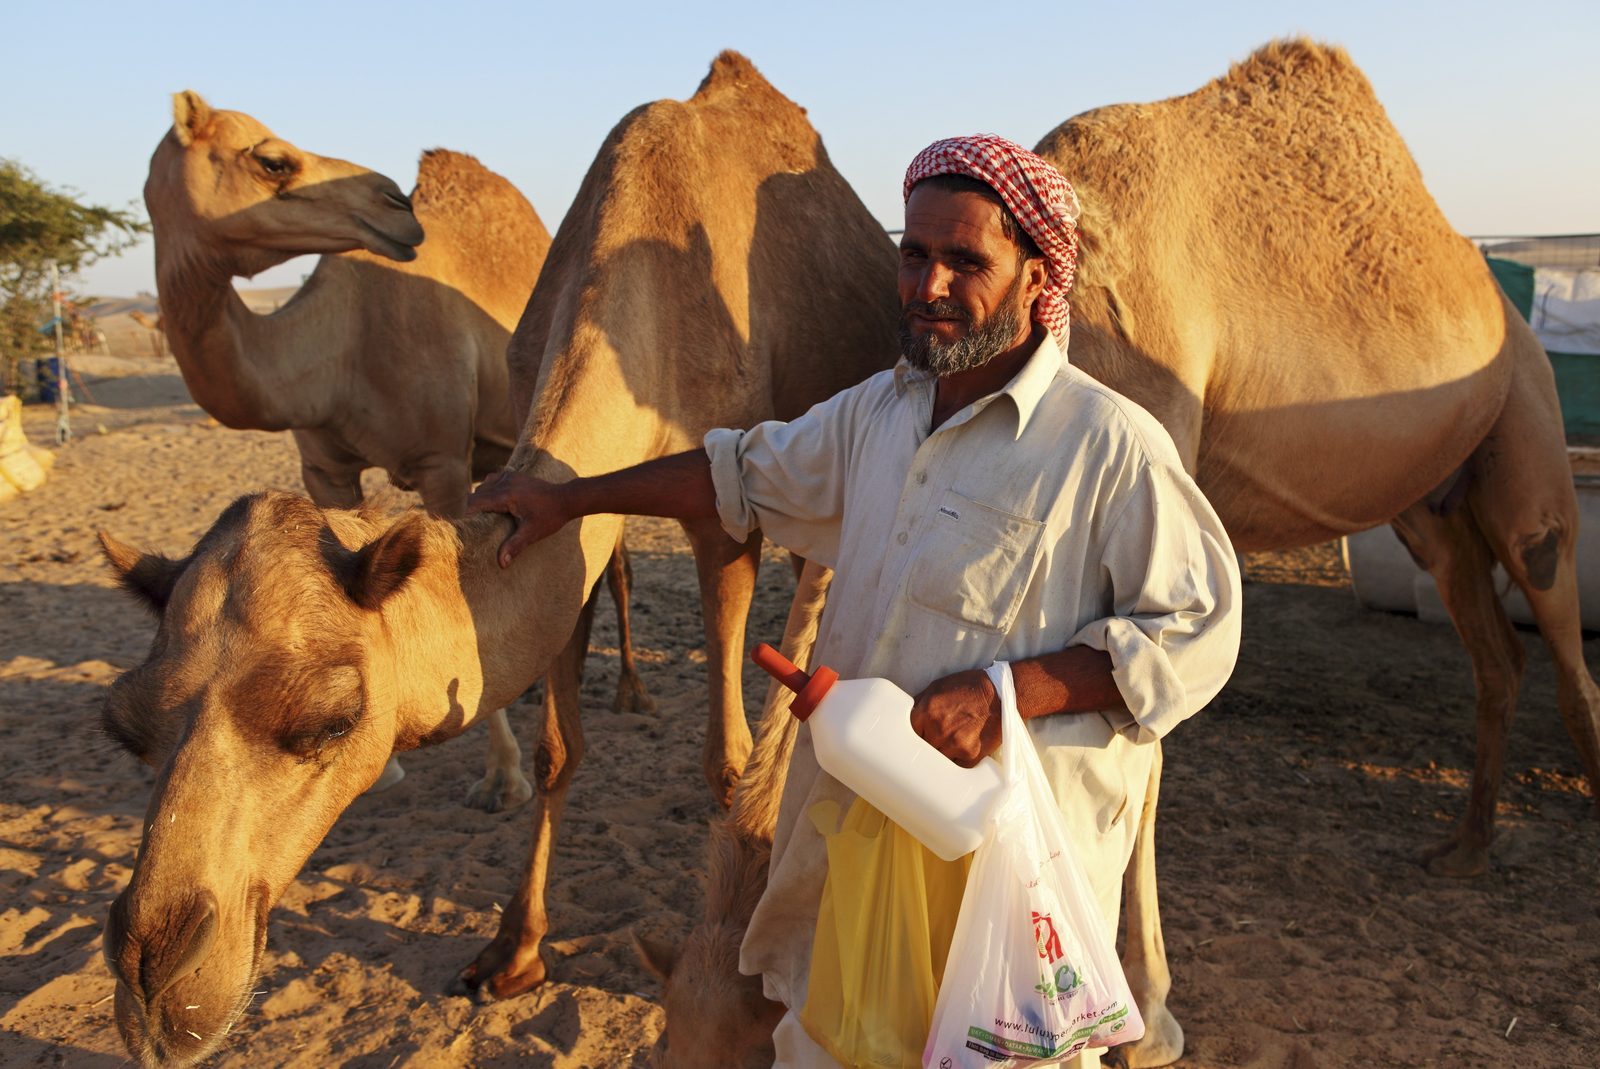 The nation United Arab Emirates in the MENA region is known for its camel farming, but the number of large poultry farms is increasing. However, the region's ability to produce the feed ingredients to meet the demand is limited by its geography and climate. [Photo: Stuart Forster/ Rex Shutterstock]